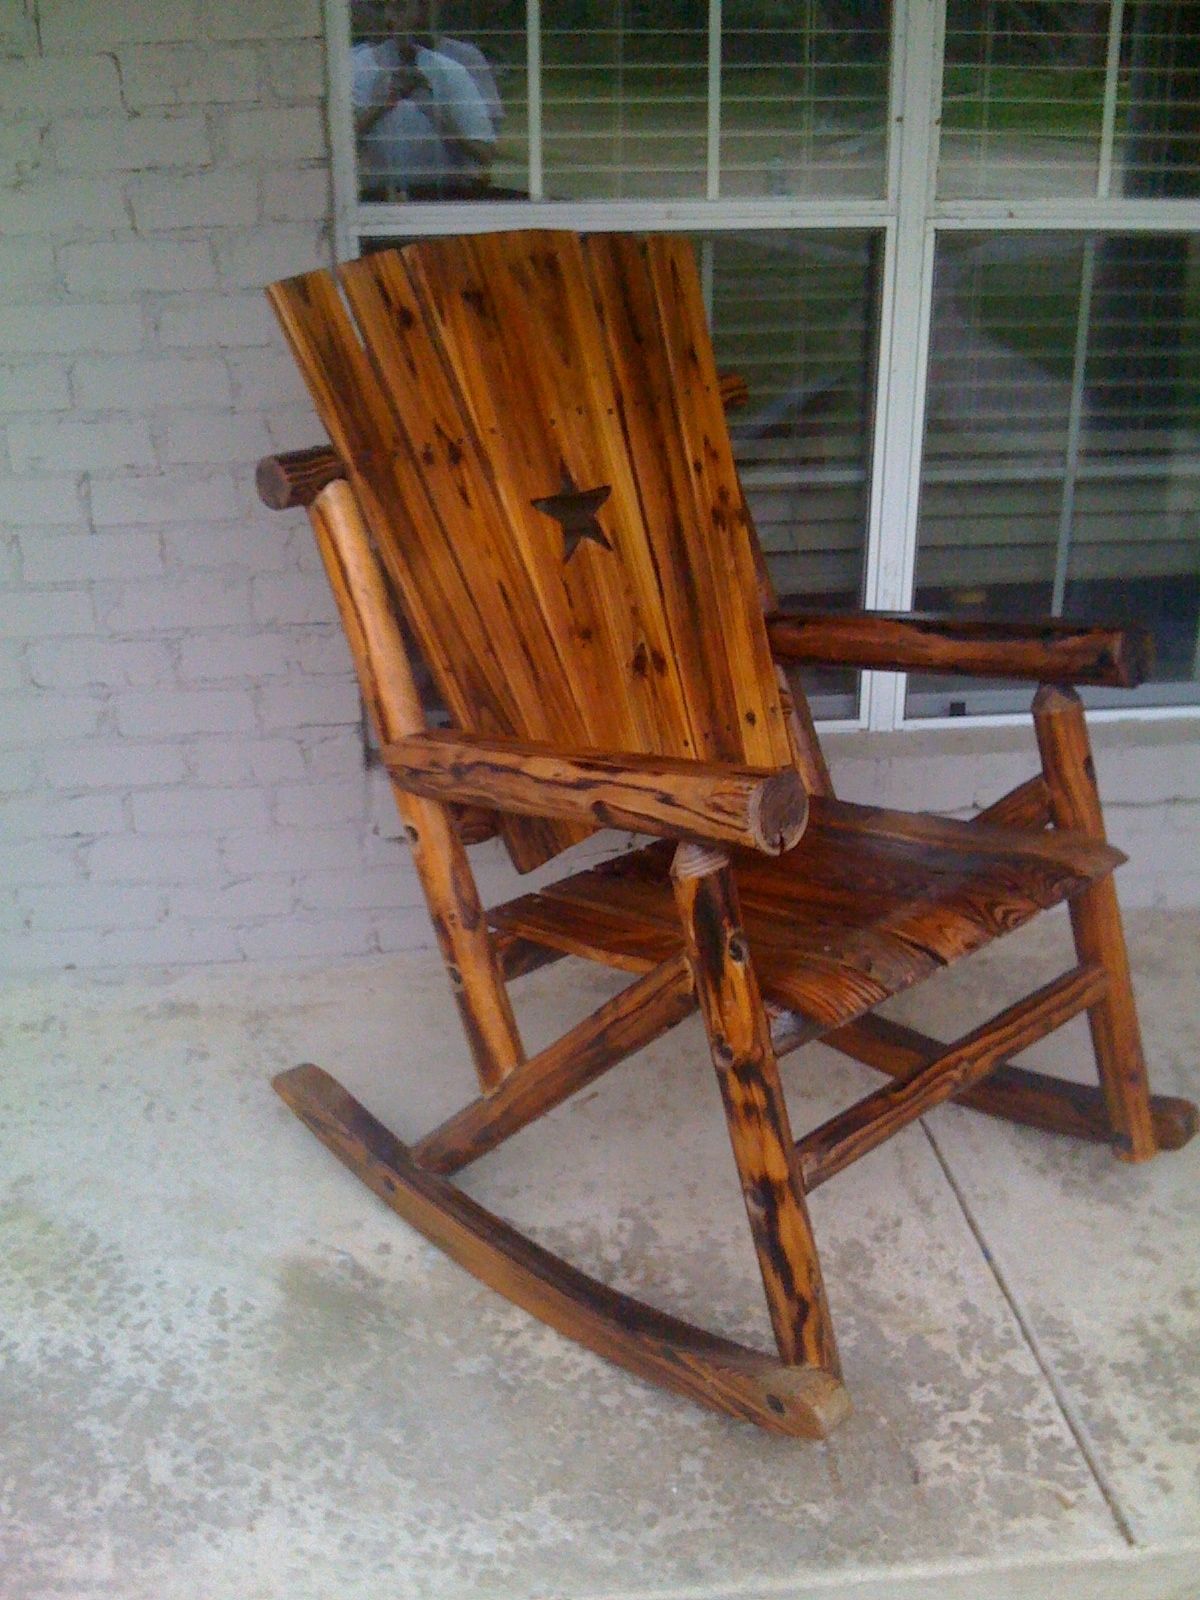 2019 Patio Wooden Rocking Chairs For Outdoor Wooden Rocking Chairs Rustic : Pleasure Outdoor Wooden (View 6 of 20)